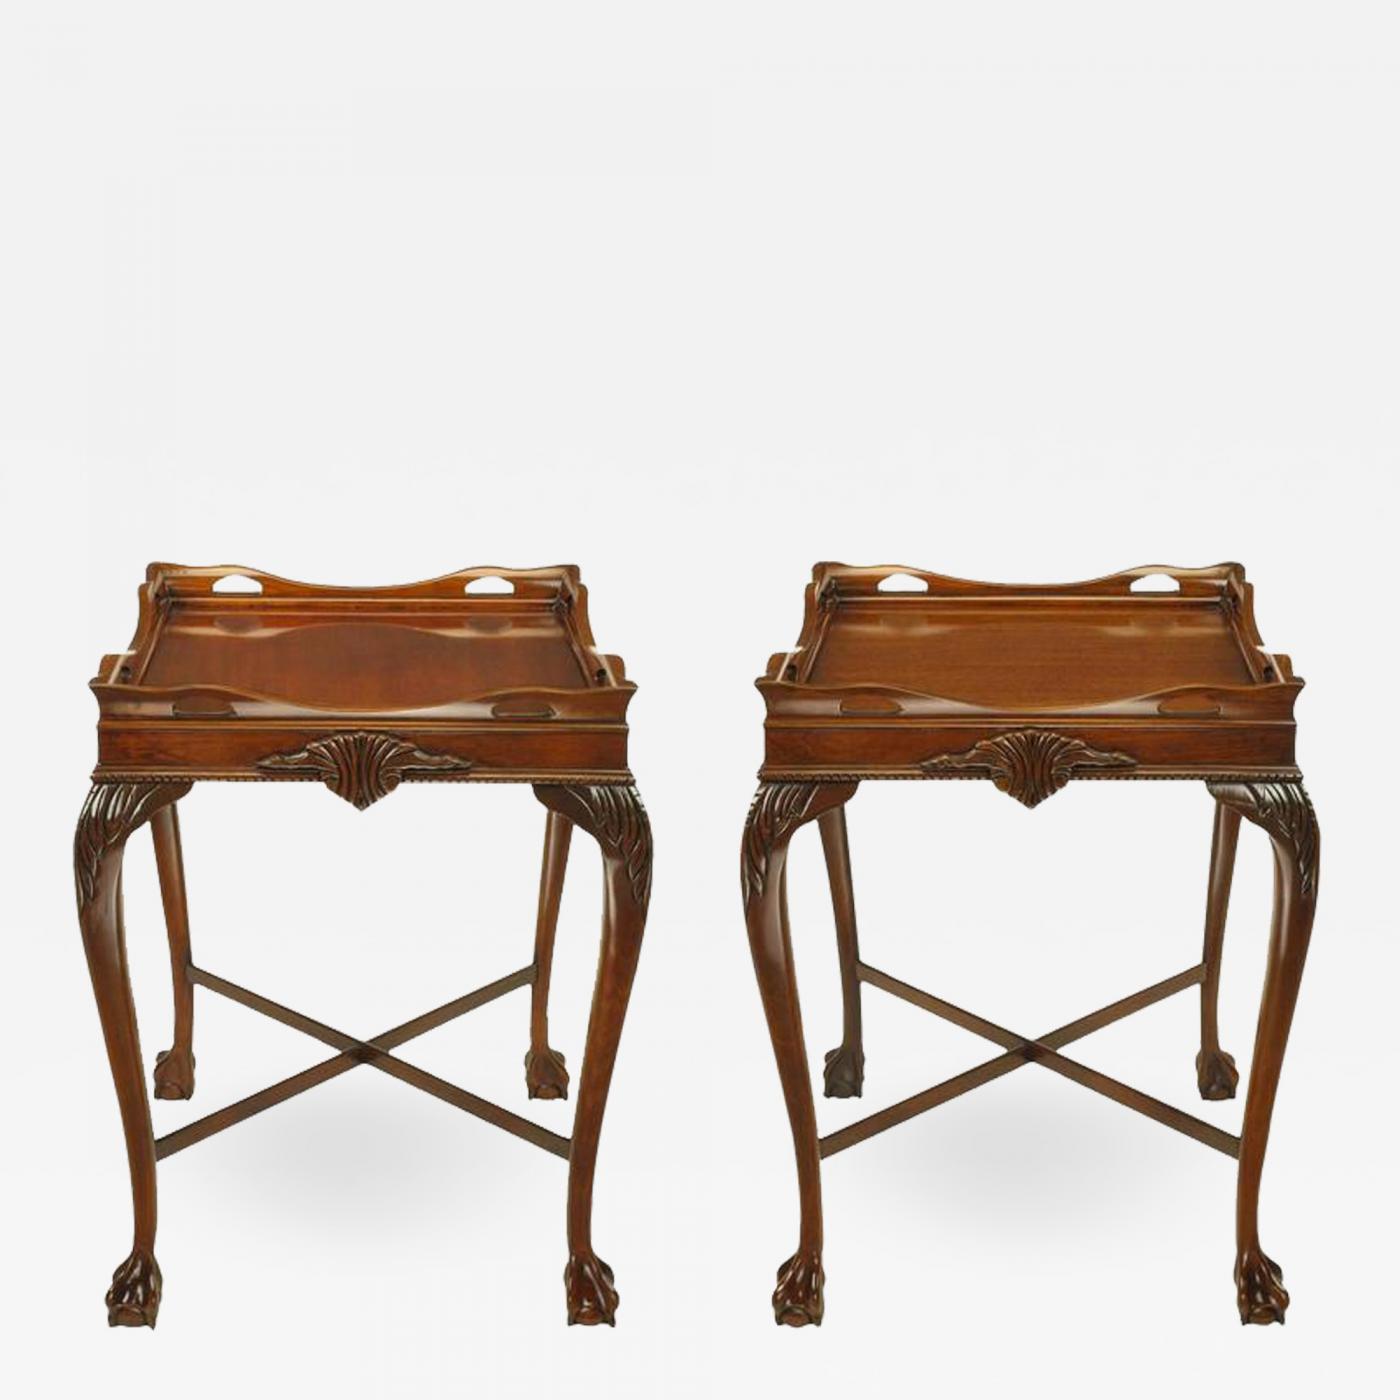 Pair Of Mahogany Ball And Claw Footed George Ii Style End Tables